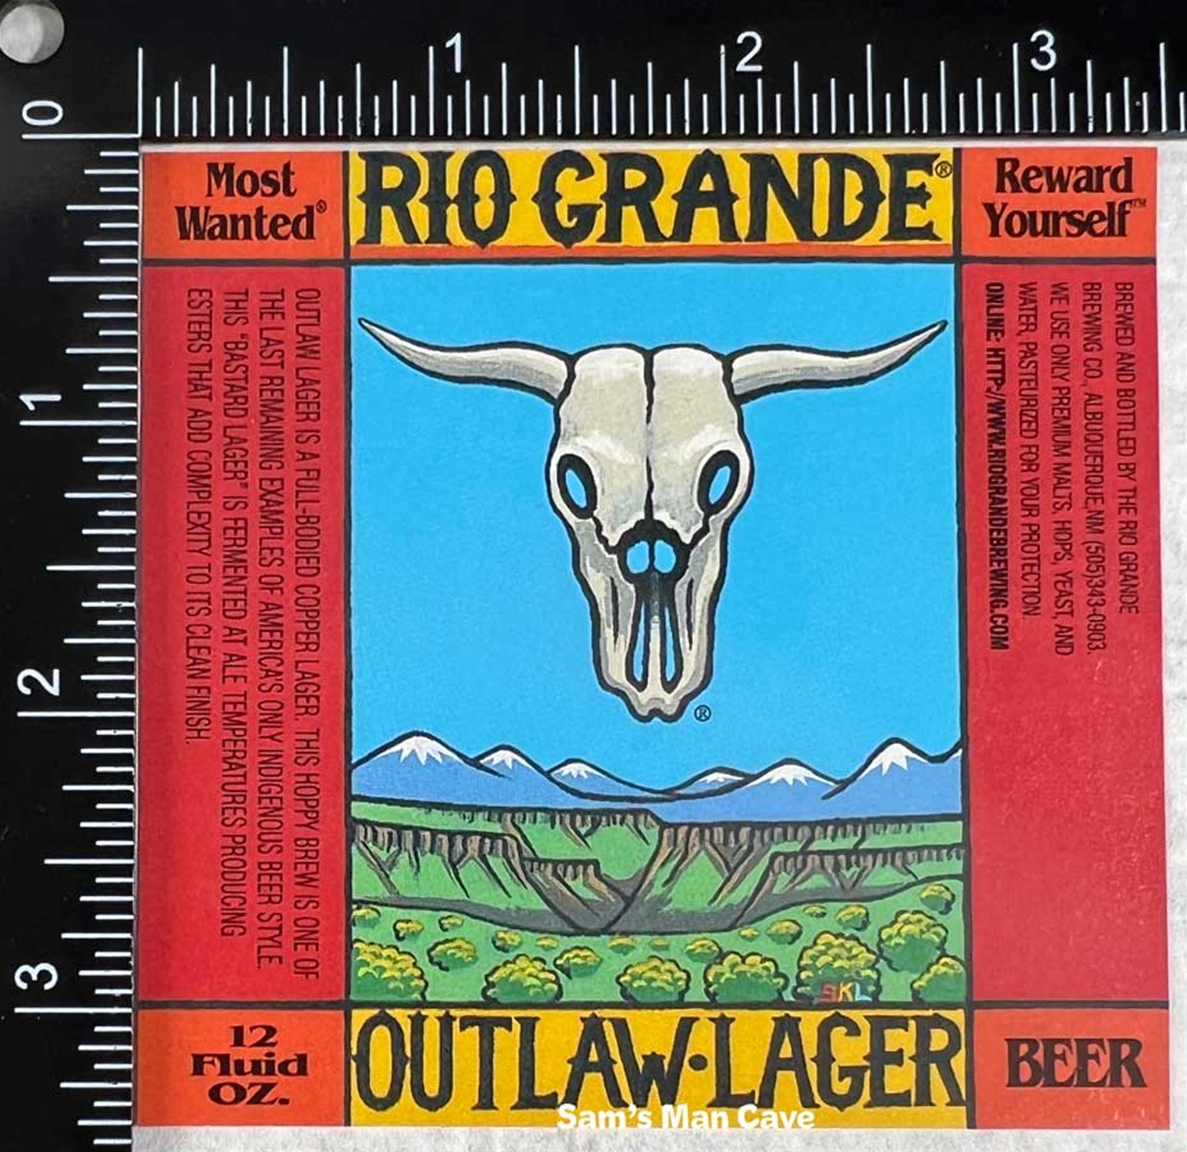 Rio Grande Outlaw Lager Beer Label